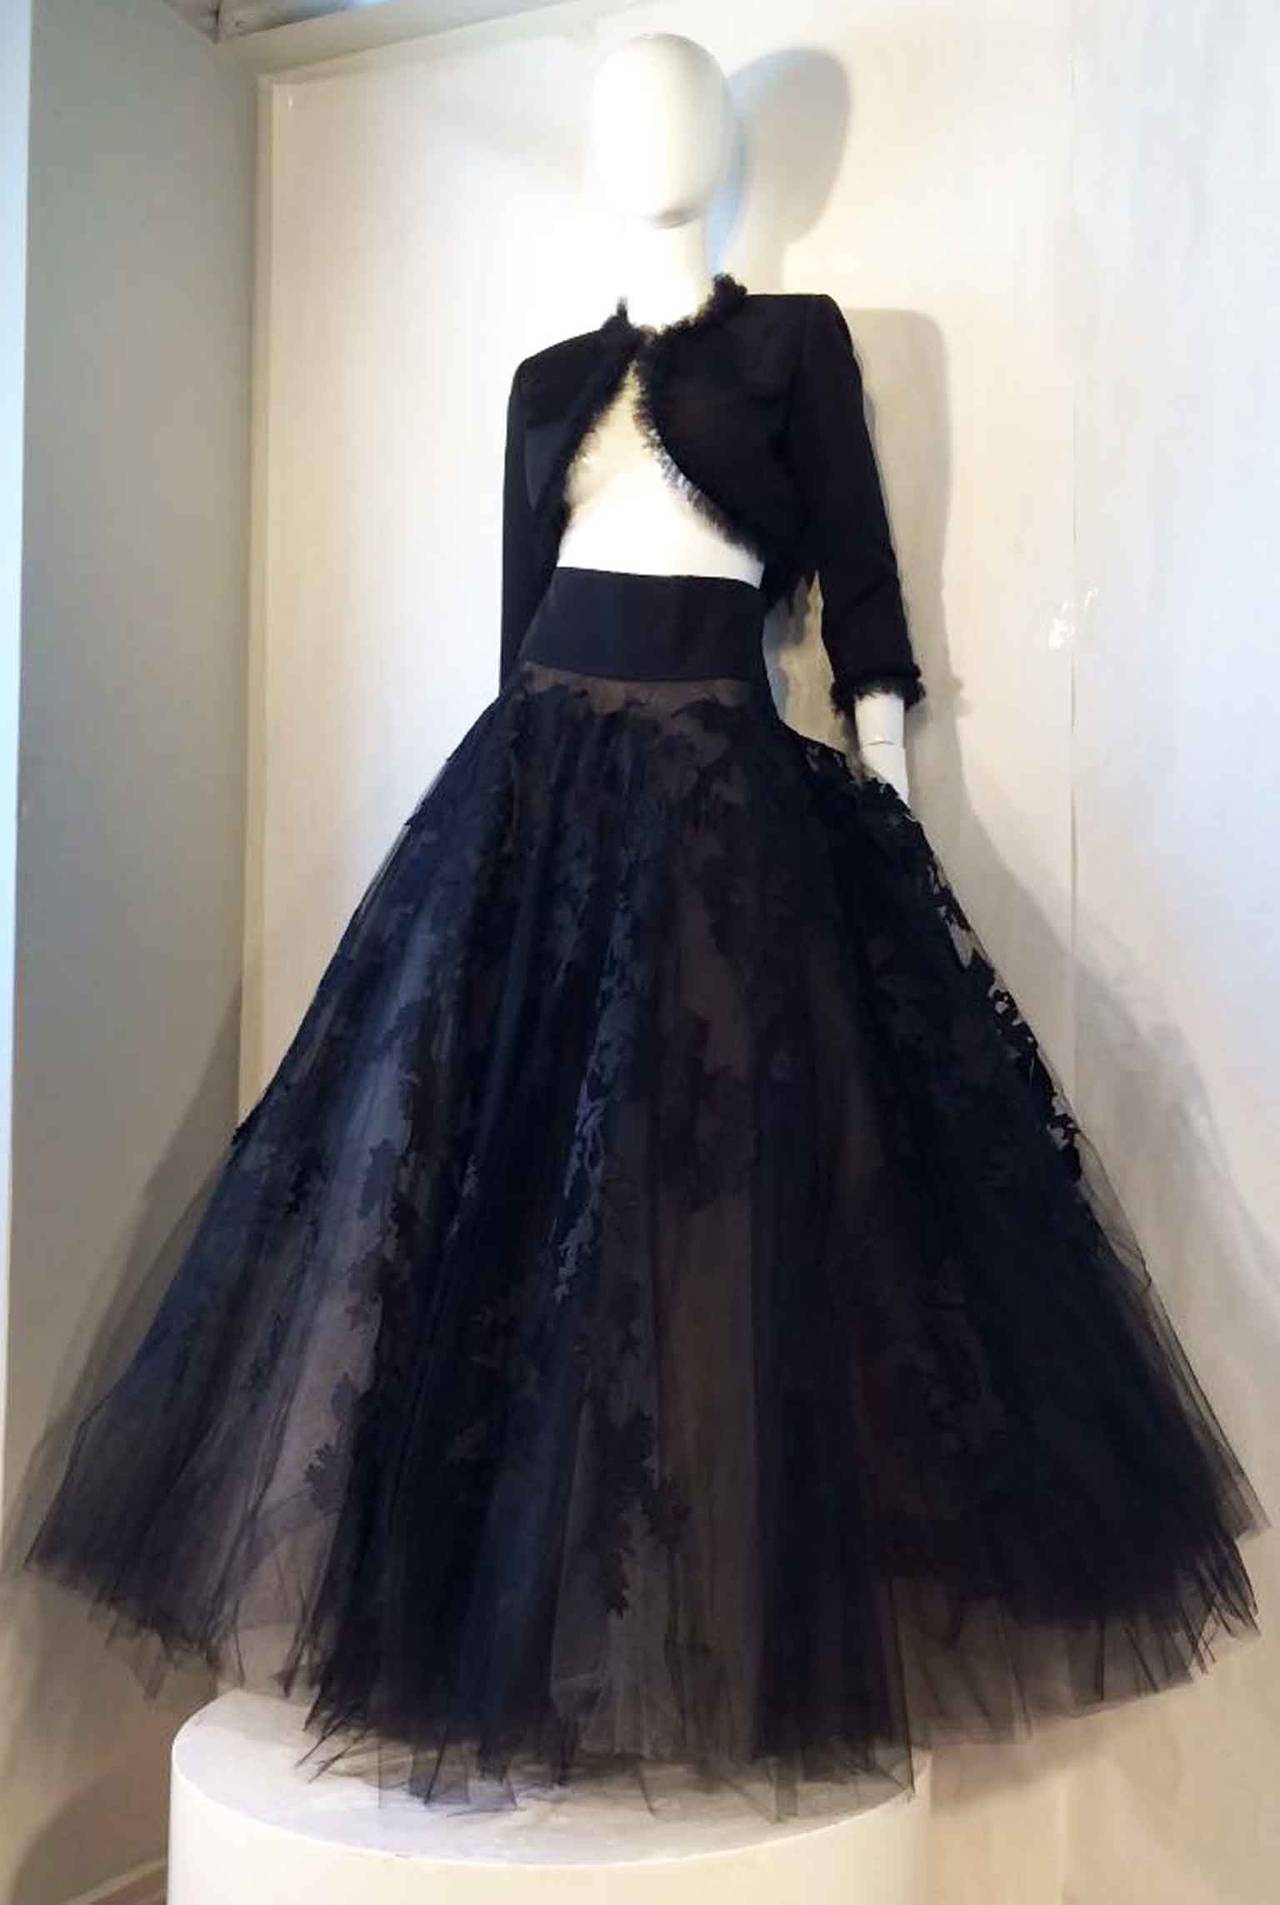 A exquisite and rare vintage Oscar de La Renta ball gown ensemble. Super fine black silk faille fabric cropped jacket trimmed with ruffle tulle and no front closures. Matching skirt features a matching fabric waistband, massive multiple layer tulle